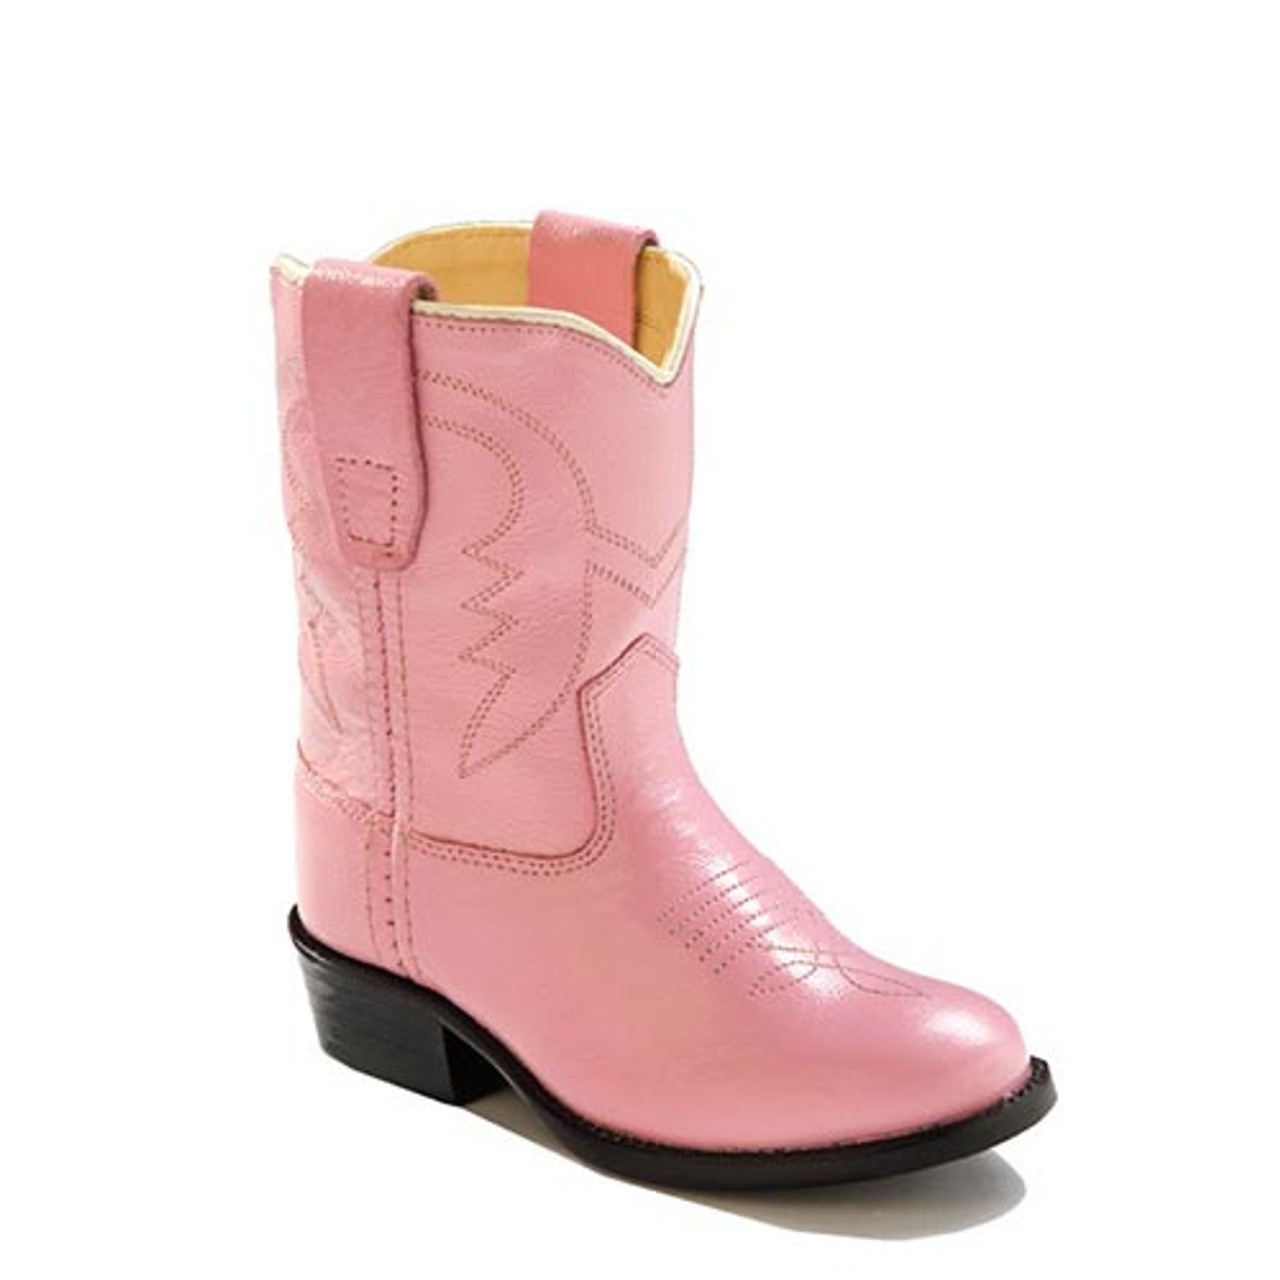 childrens pink boots